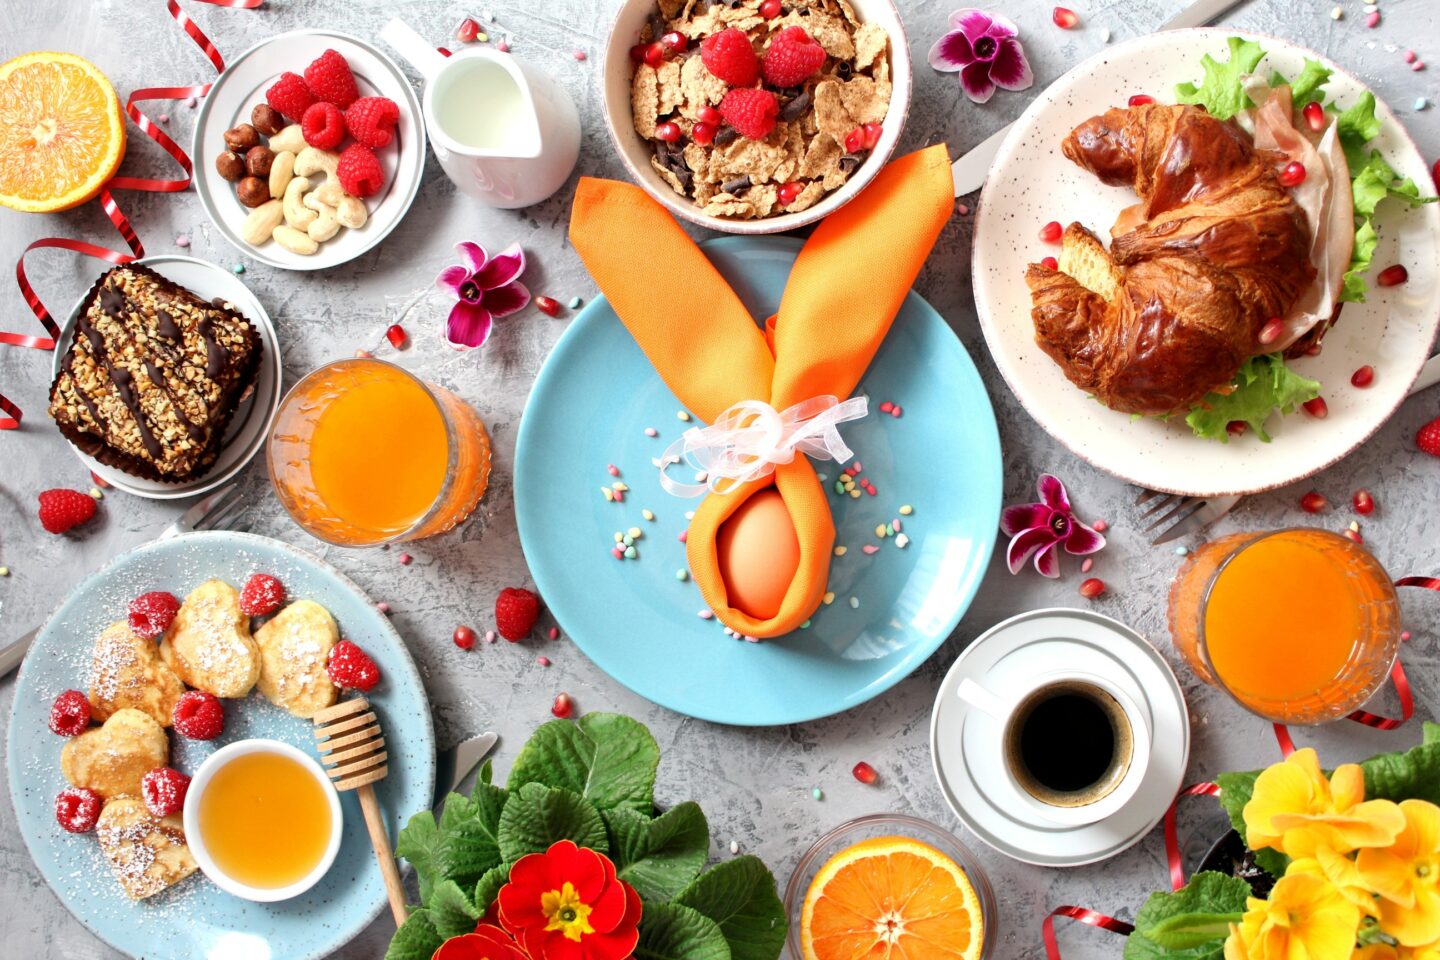 15 Crowd-Pleasing Easter Brunch Recipes Guaranteed To Win Over Your ...